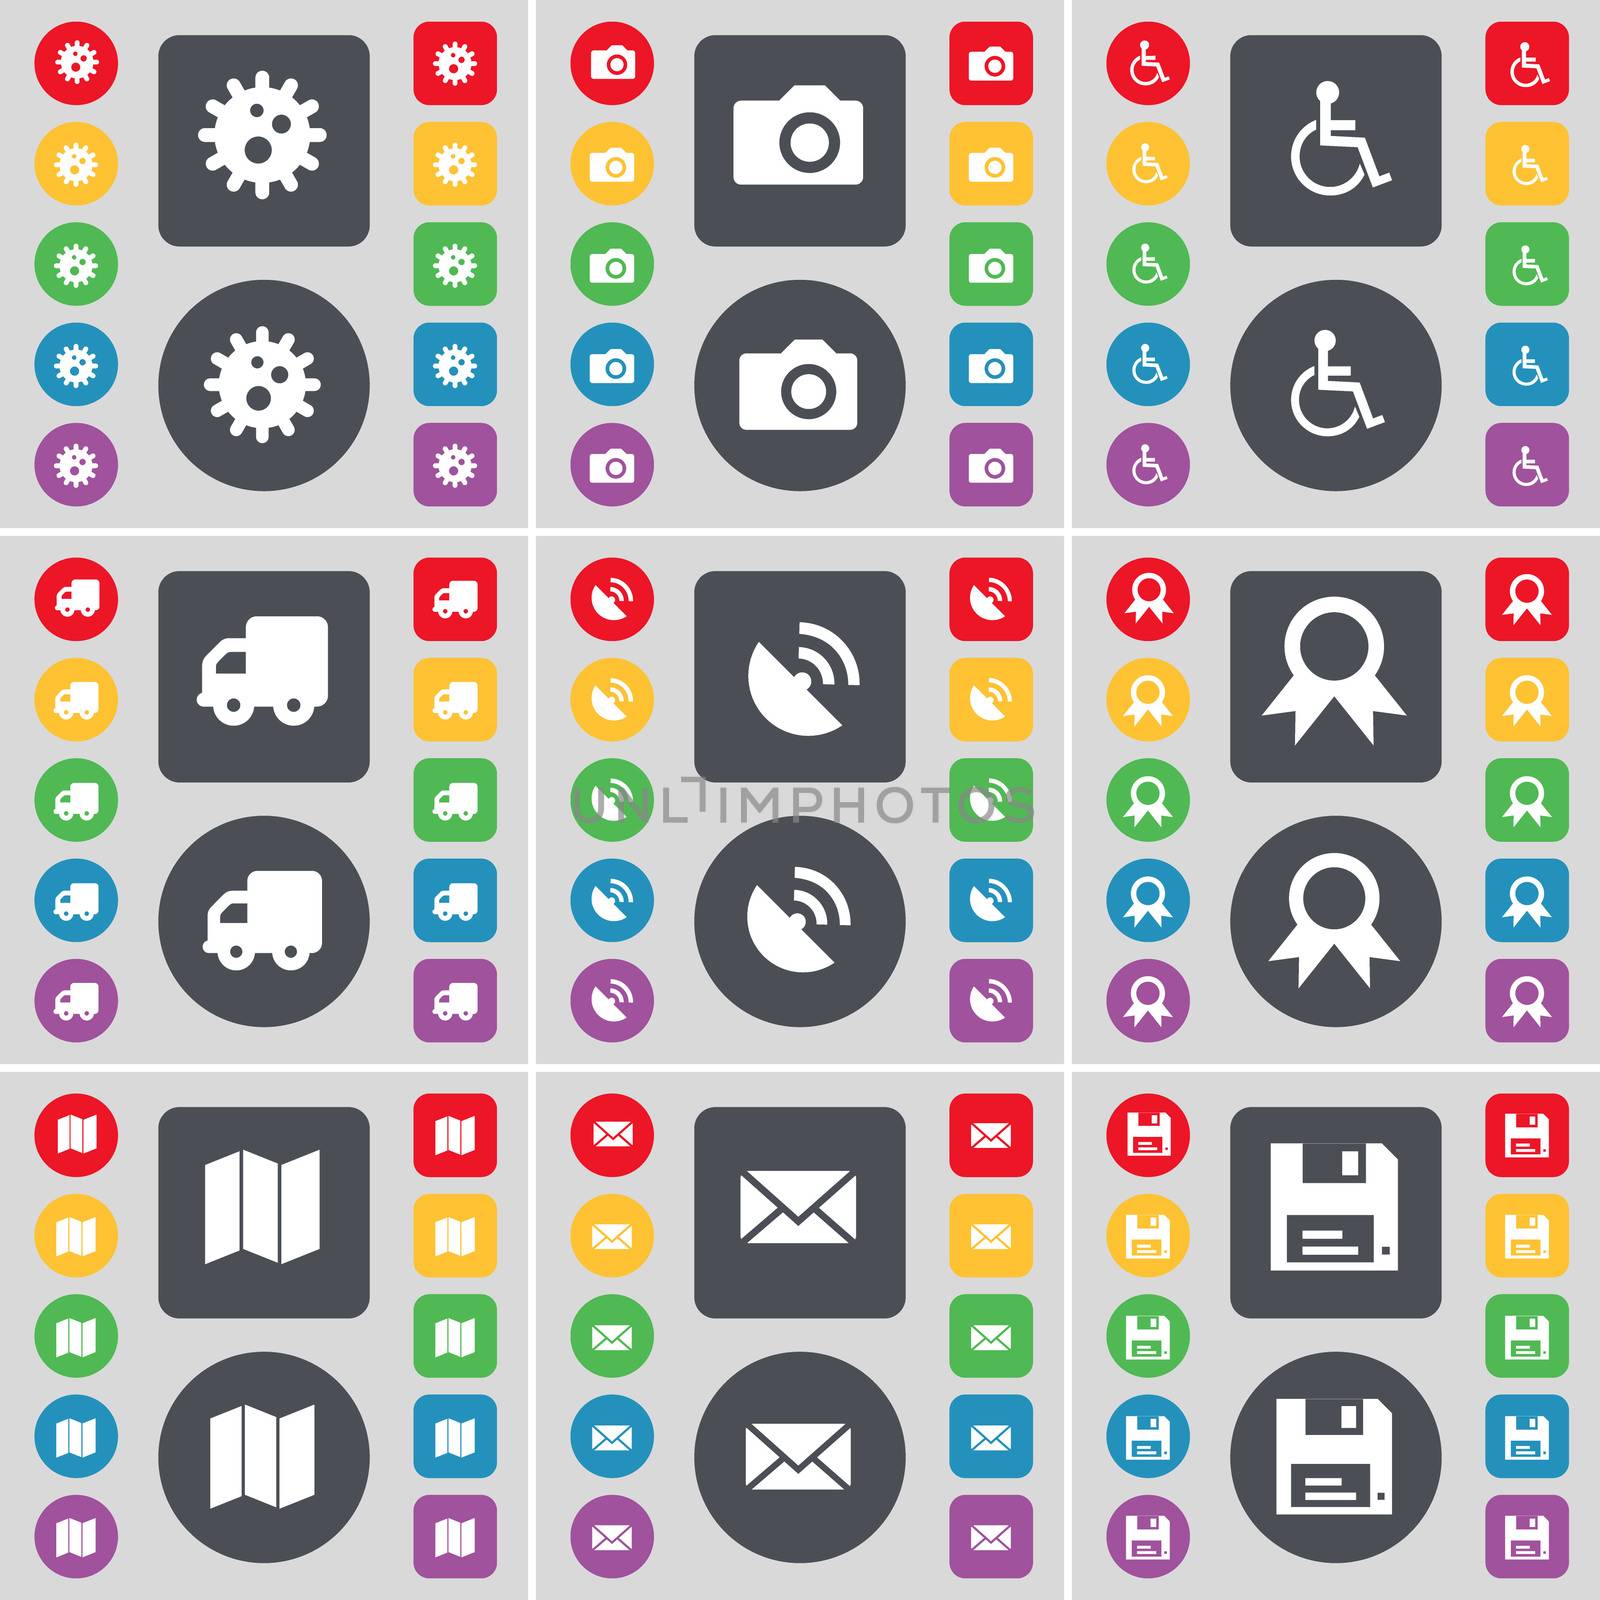 Gear, Camera, Disabled person, Truck, Satellite dish, Medal, Map, Message, Floppy icon symbol. A large set of flat, colored buttons for your design. illustration